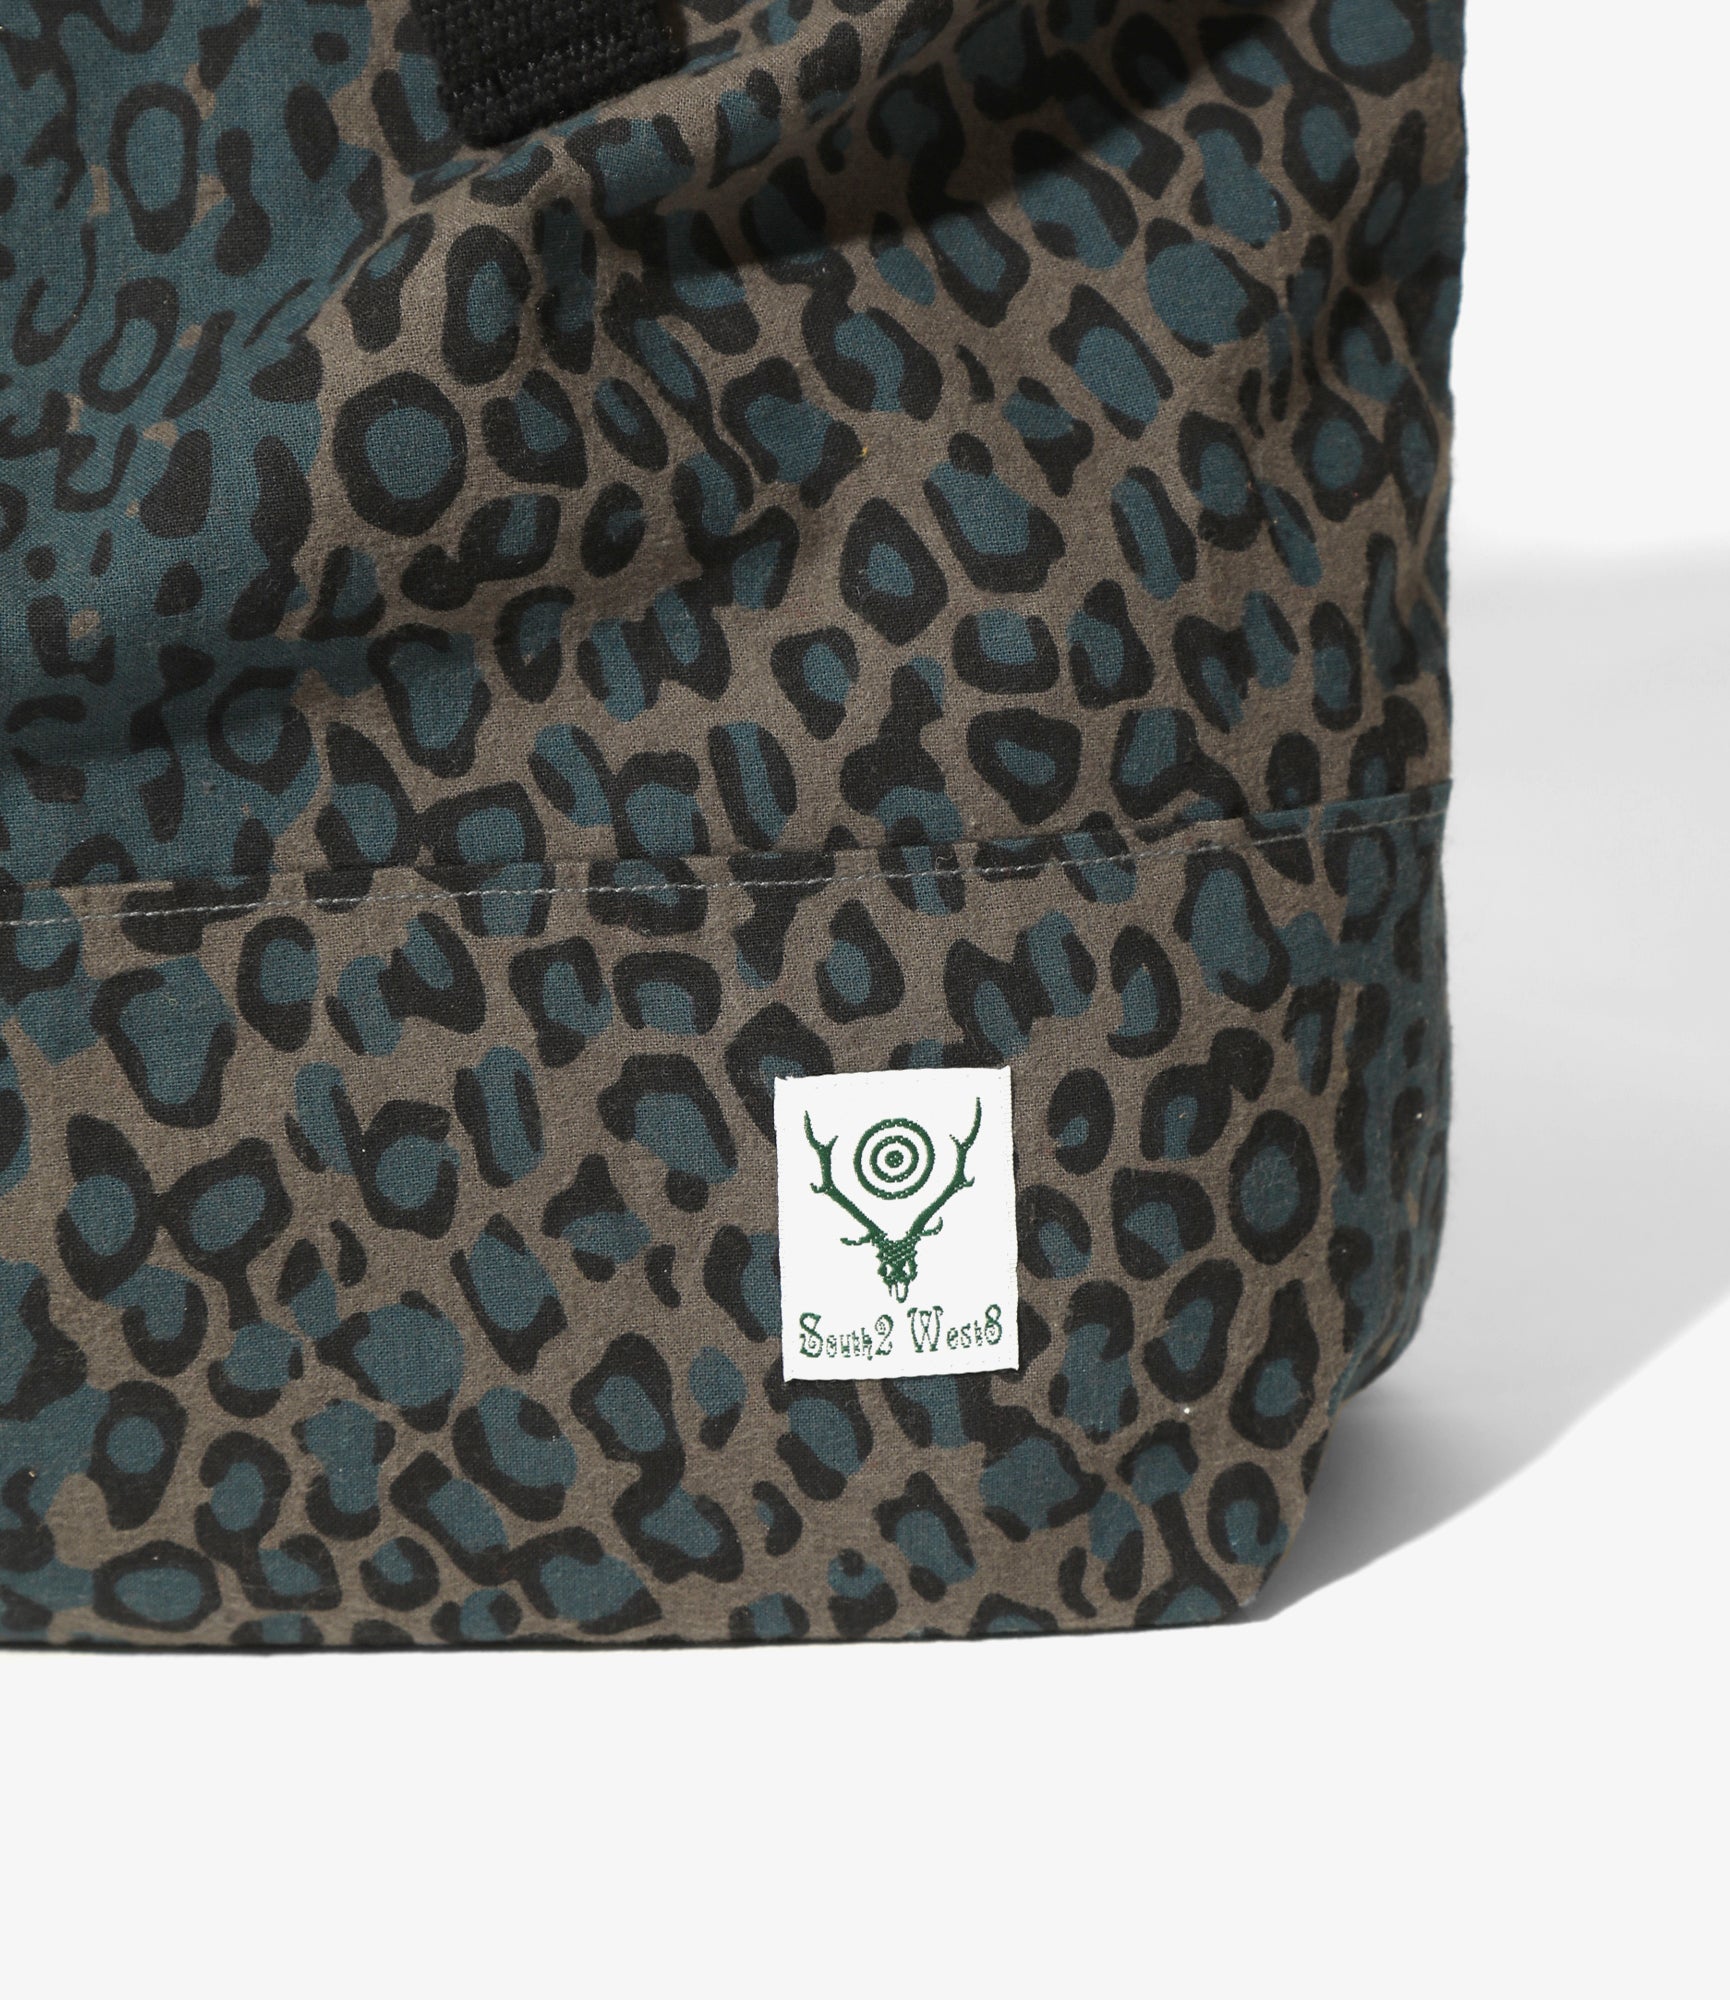 South2 West8 Canal Park Tote - Flannel Cloth / Printed - Leopard